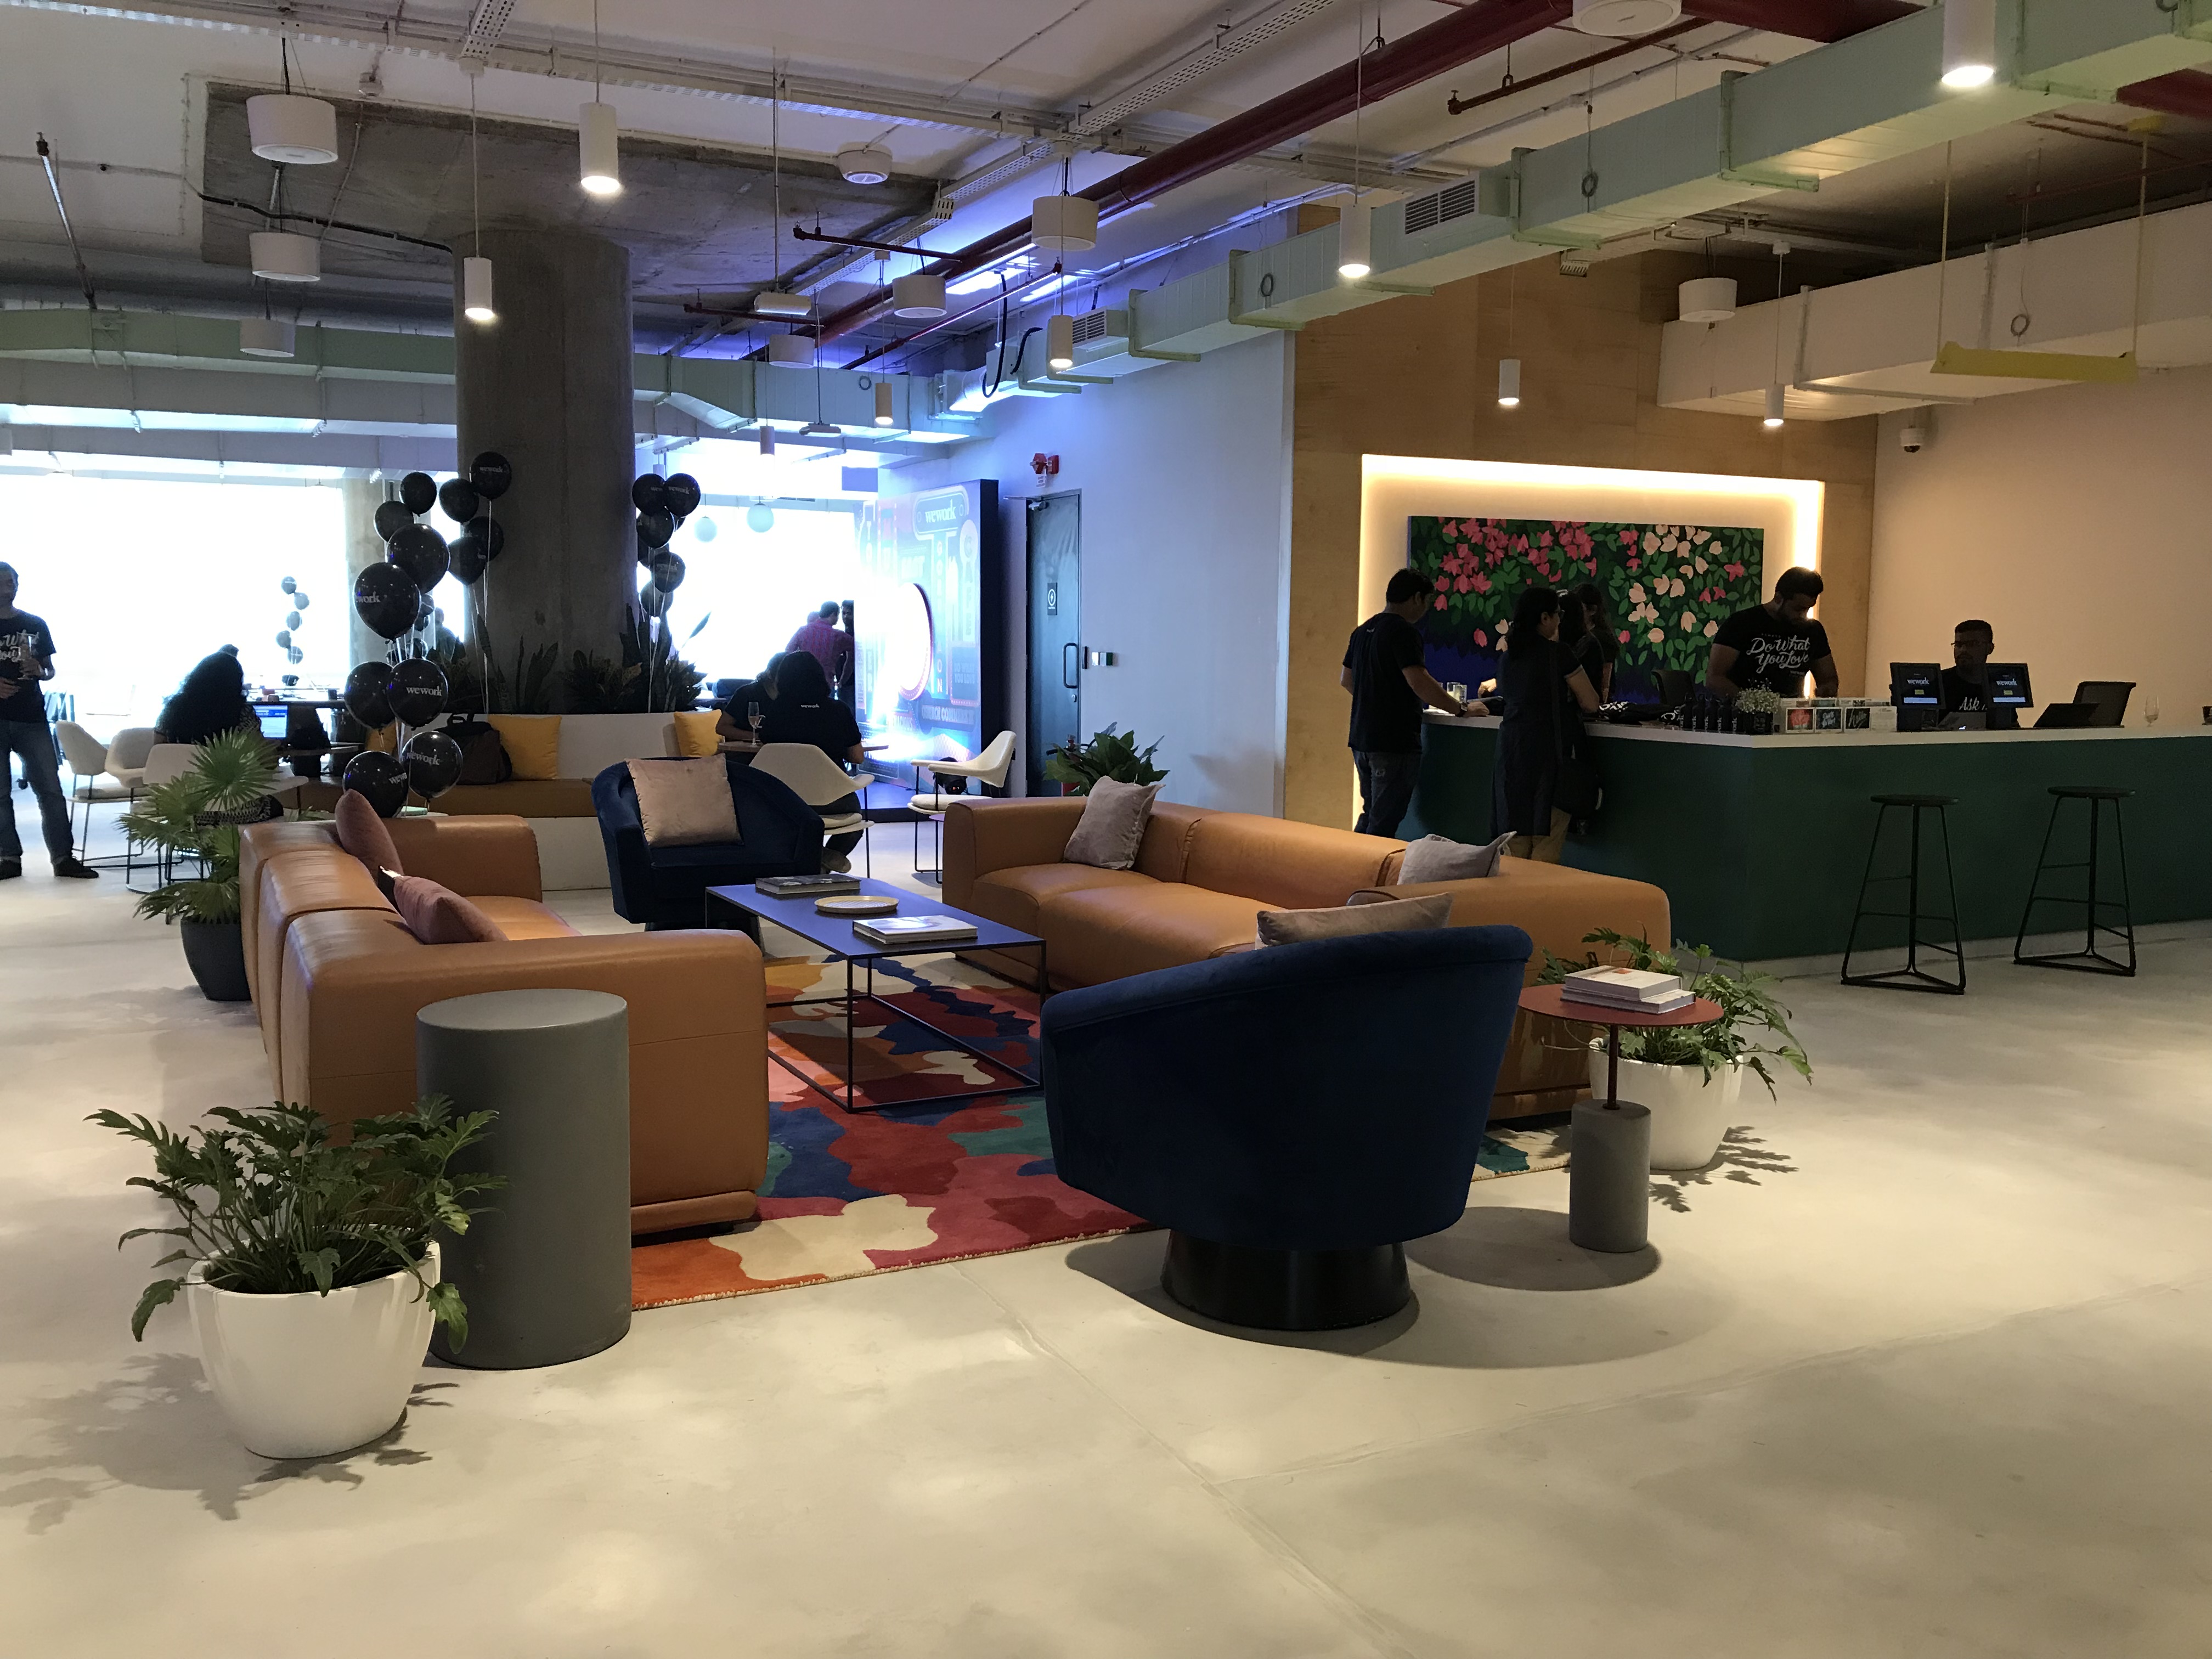 WeWork Oberoi Mumbai, Shared working spaces, Shared offices, Office space absorption in India, Co working spaces, Investment in co working spaces, WeWork in India, India real estate news, Indian realty news, Real estate news India, Indian property market news, Investment in real estate, Track2Realty